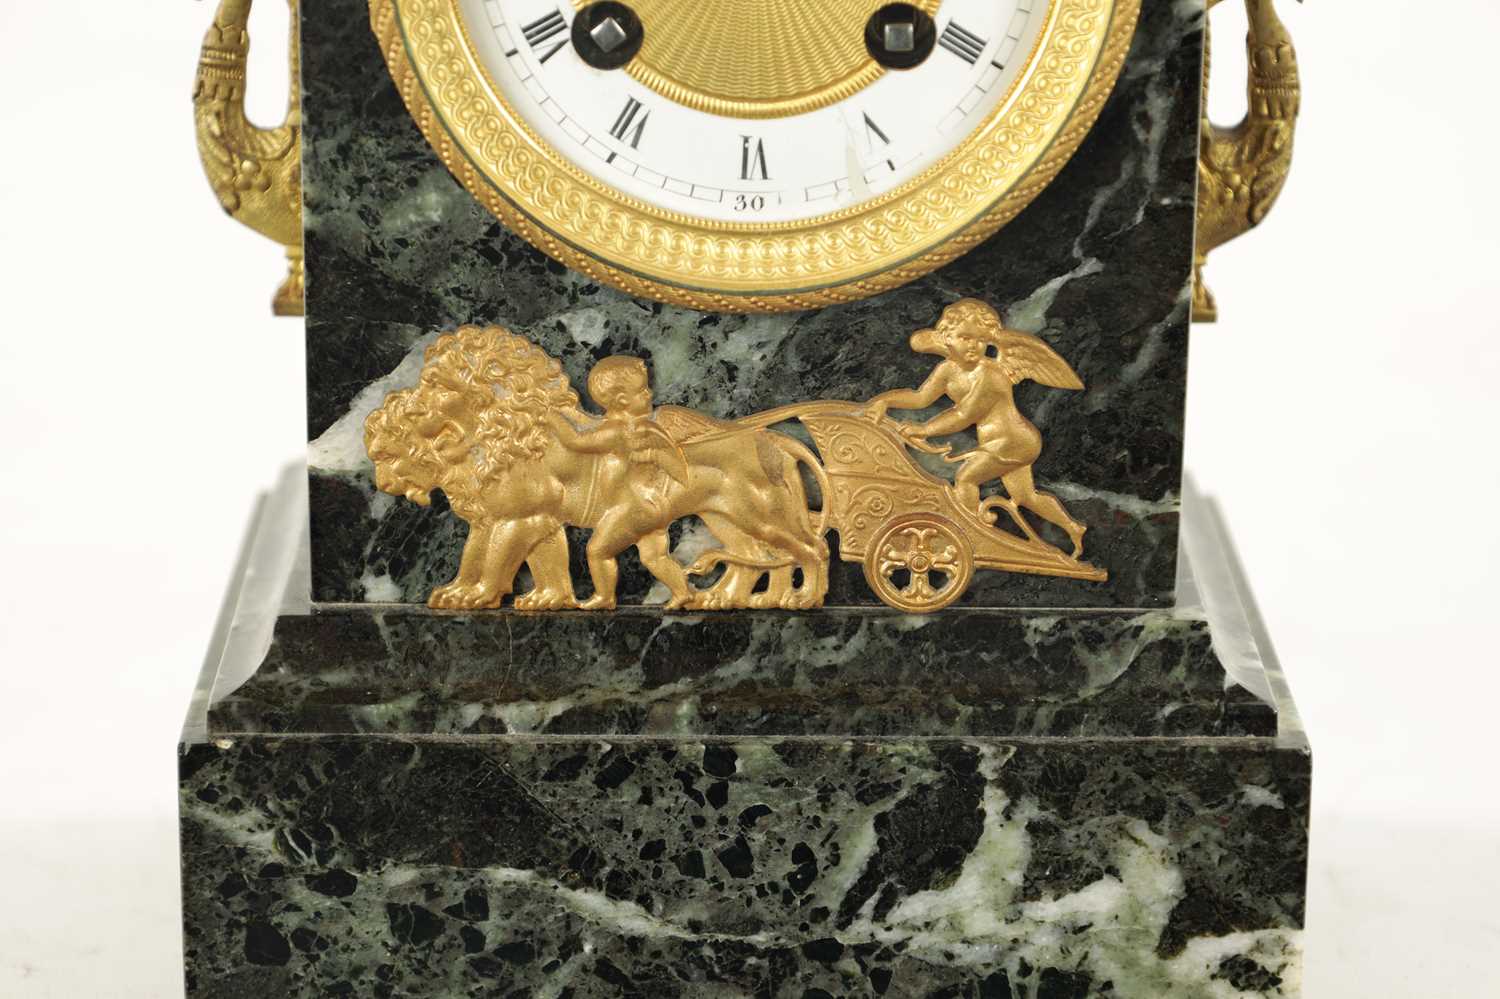 A LATE 19TH CENTURY FRENCH ANTICO VERDE MARBLE, BRONZE AND ORMOLU MANTEL CLOCK - Image 5 of 12